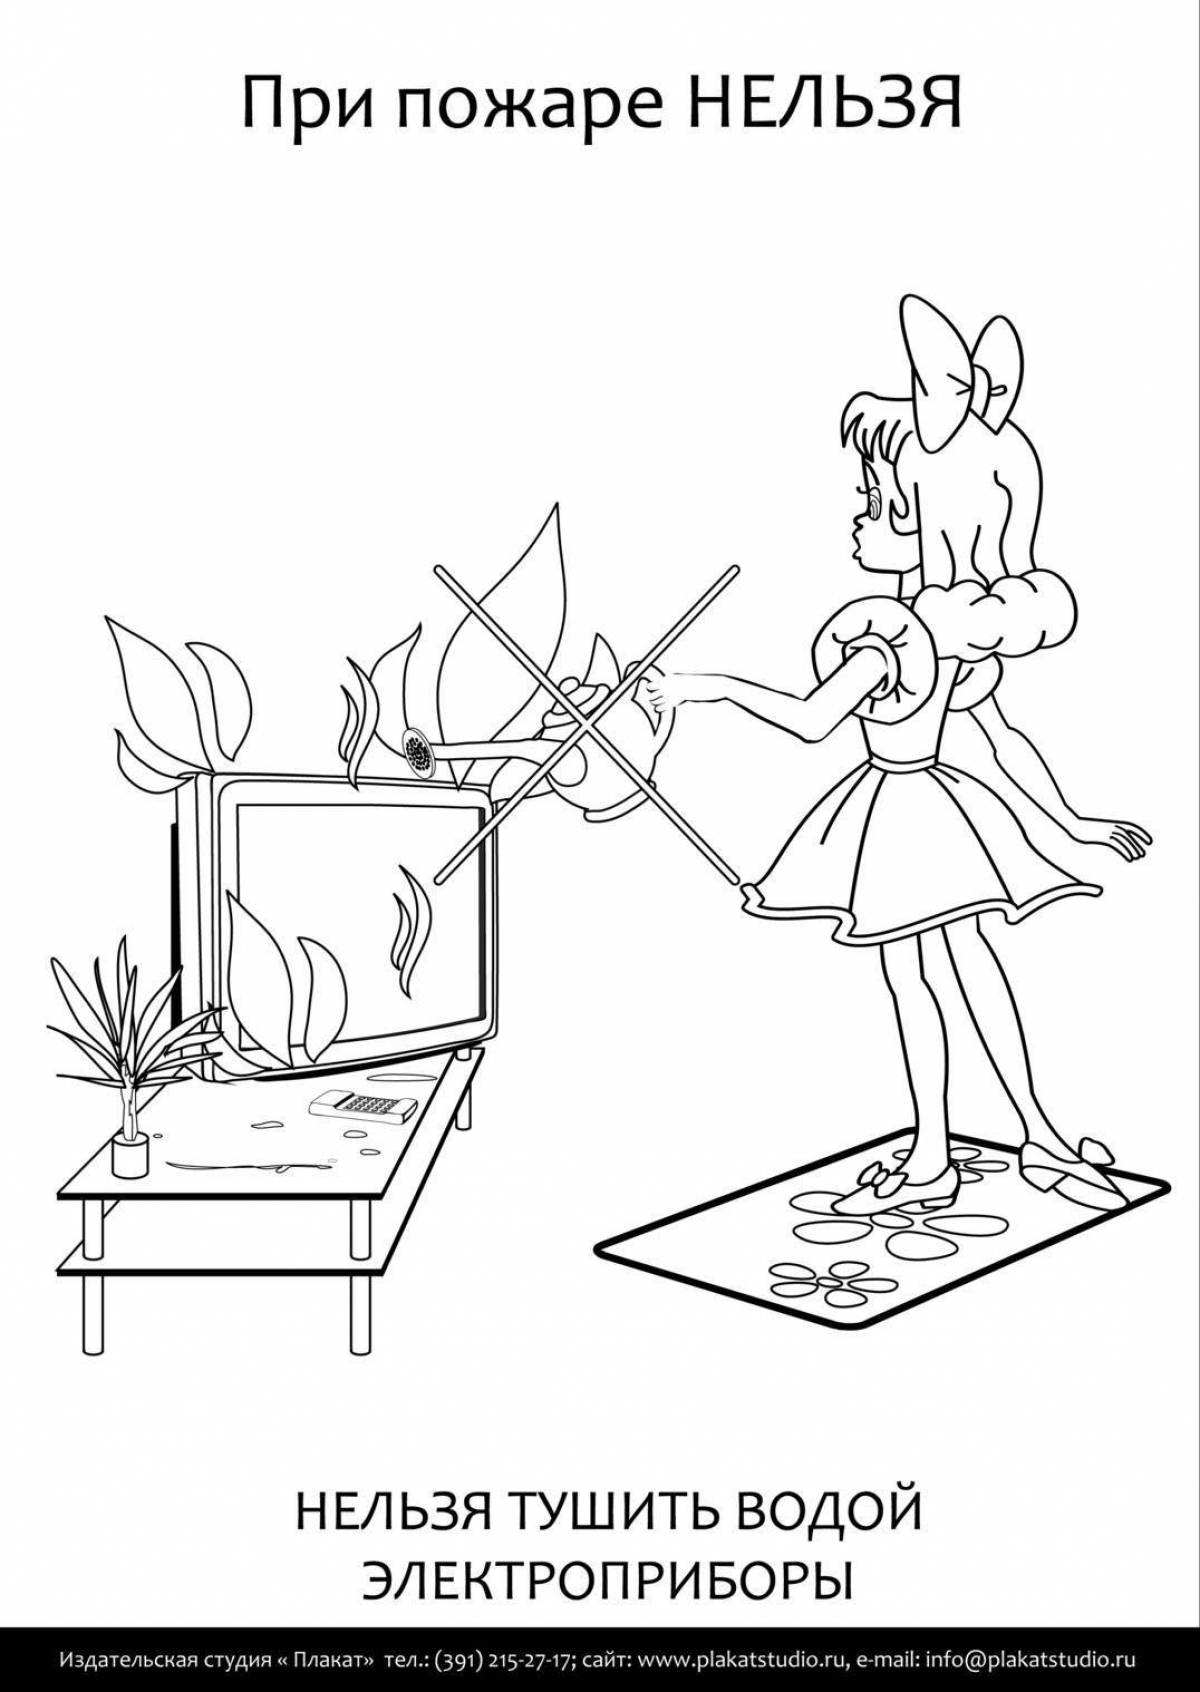 Crazy Home Security coloring page